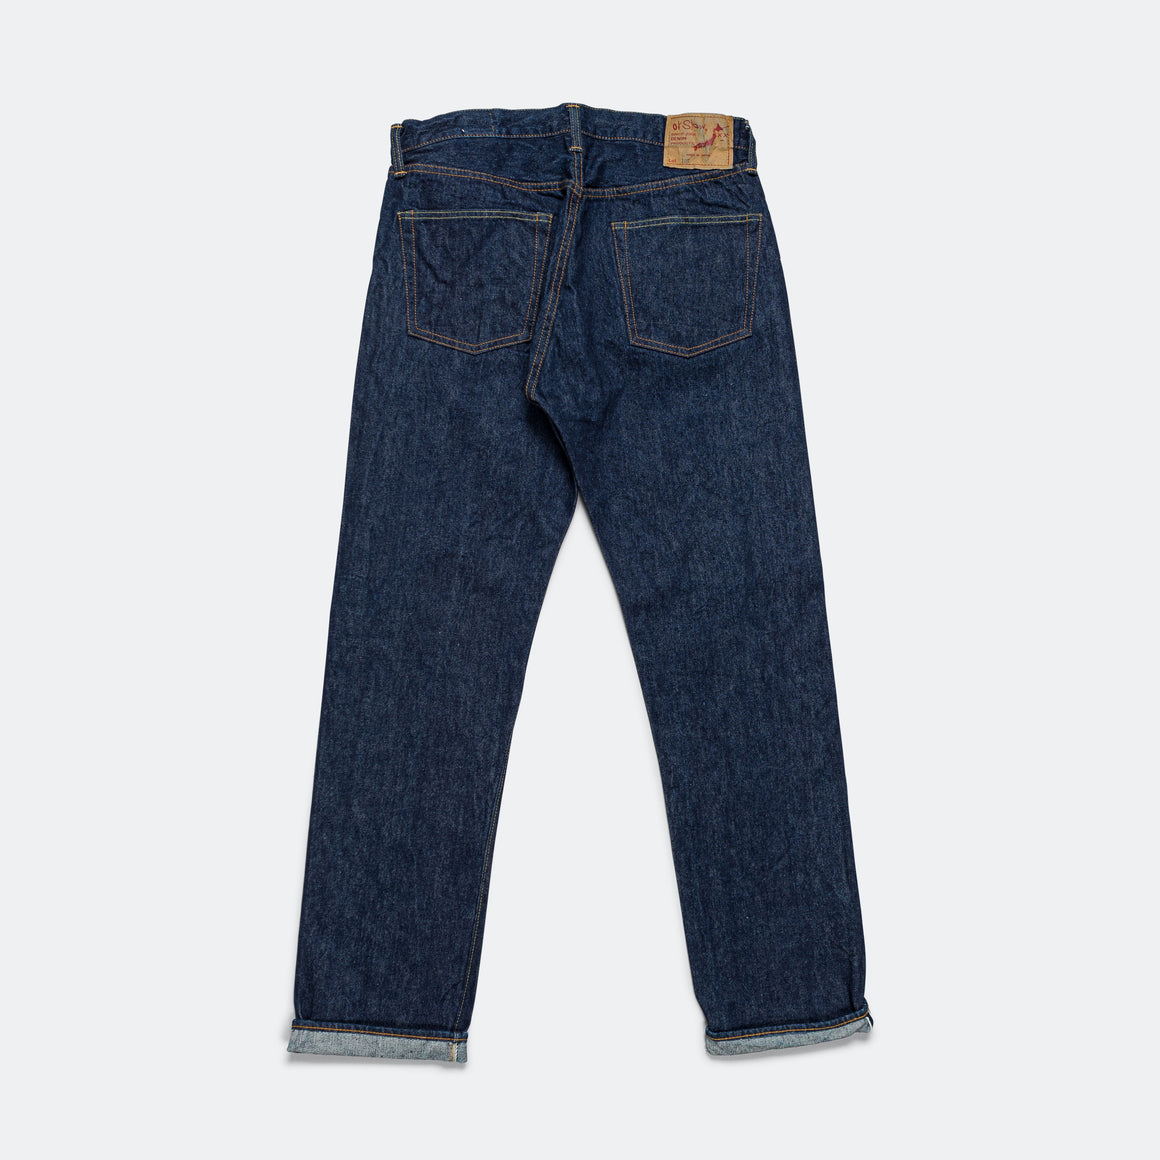 orSlow - 105 Standard Selvedge Denim - One Wash - UP THERE